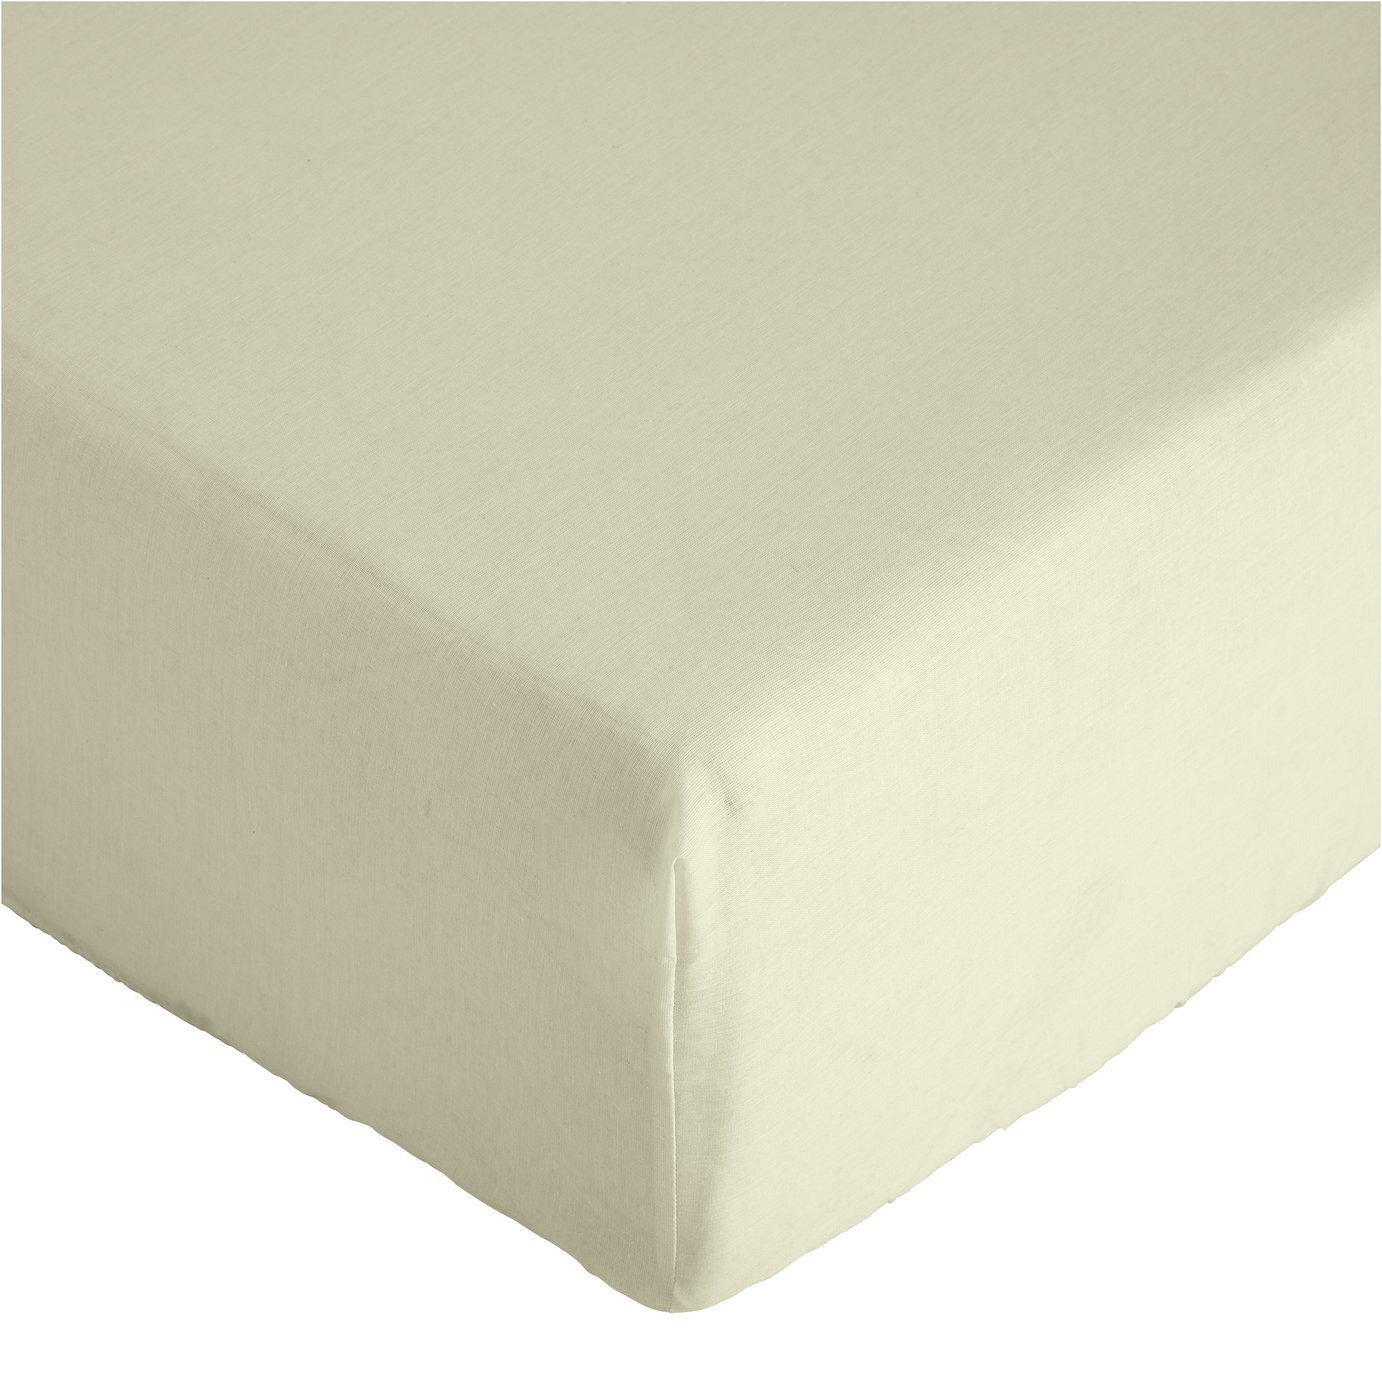 Argos Home Plain Cream Fitted Sheet - Double